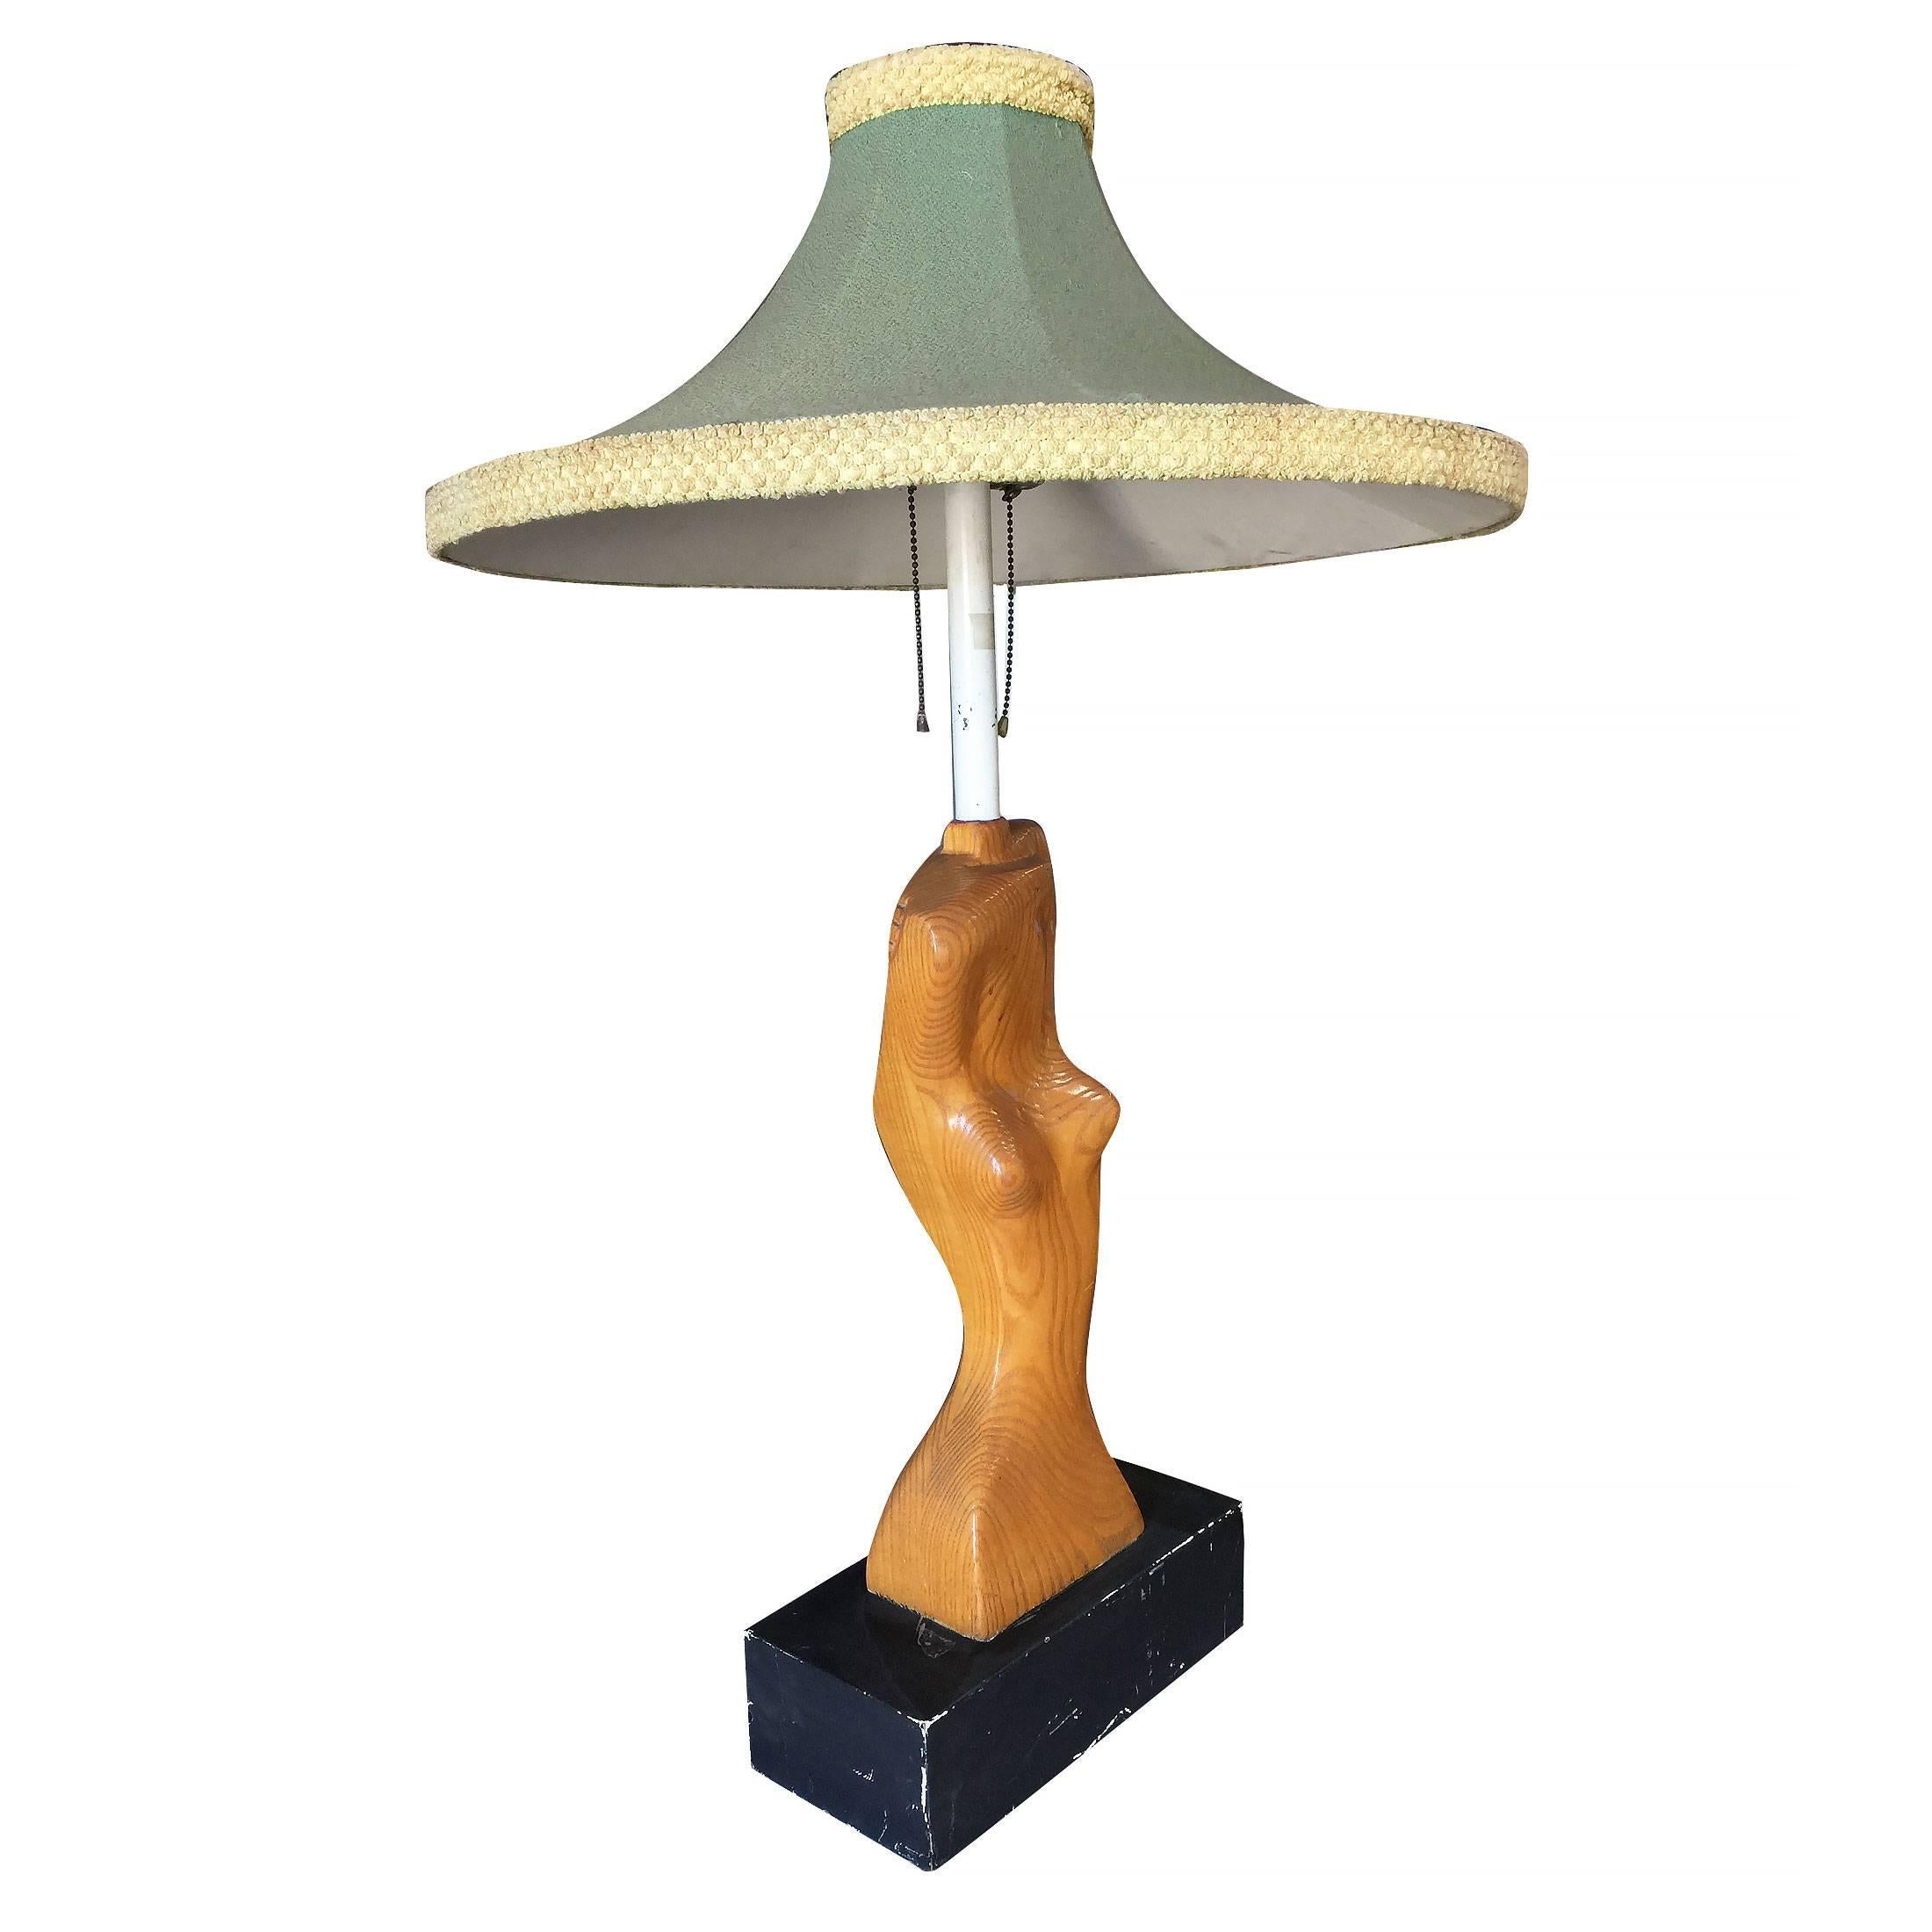 Heifetz style hand carved table lamp featuring an abstract nude female bust resting on a black base. This comes with an original green midcentury shade.